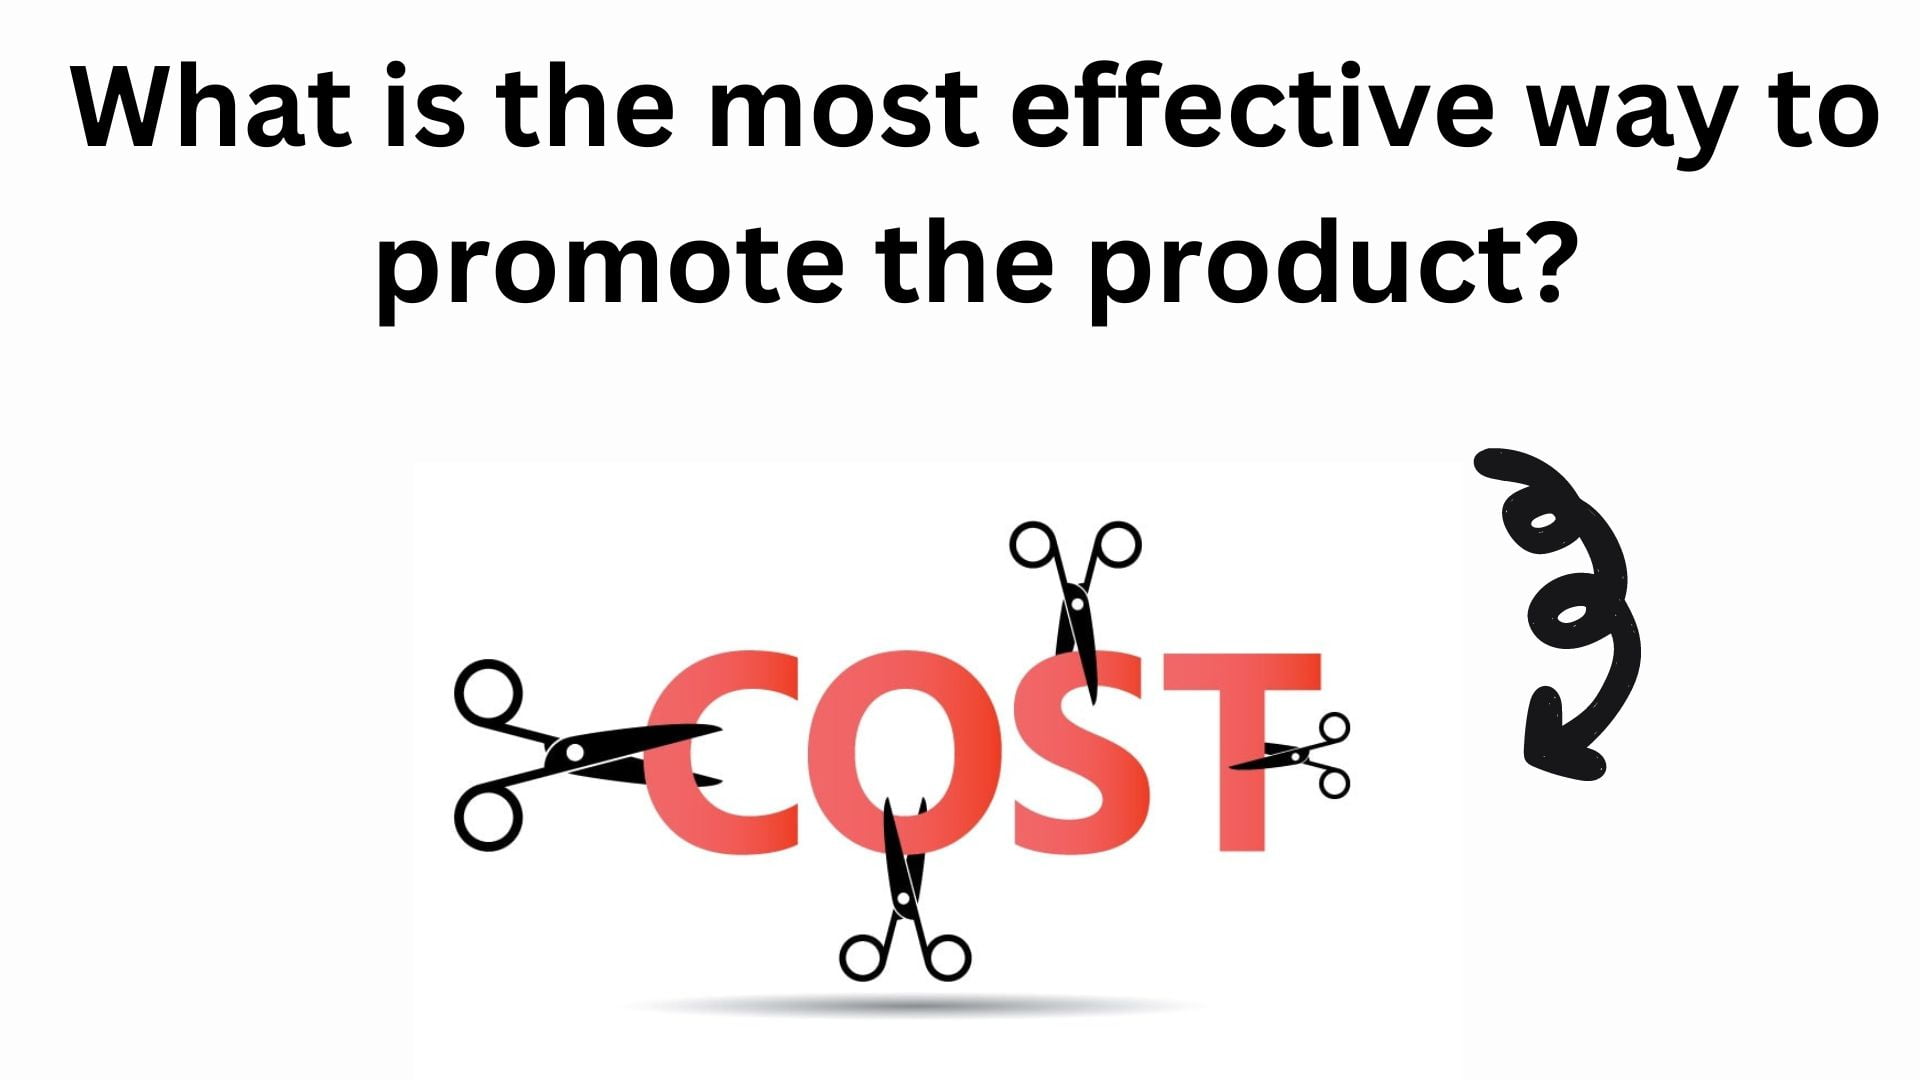 What Is The Most Effective Way To Promote The Product?